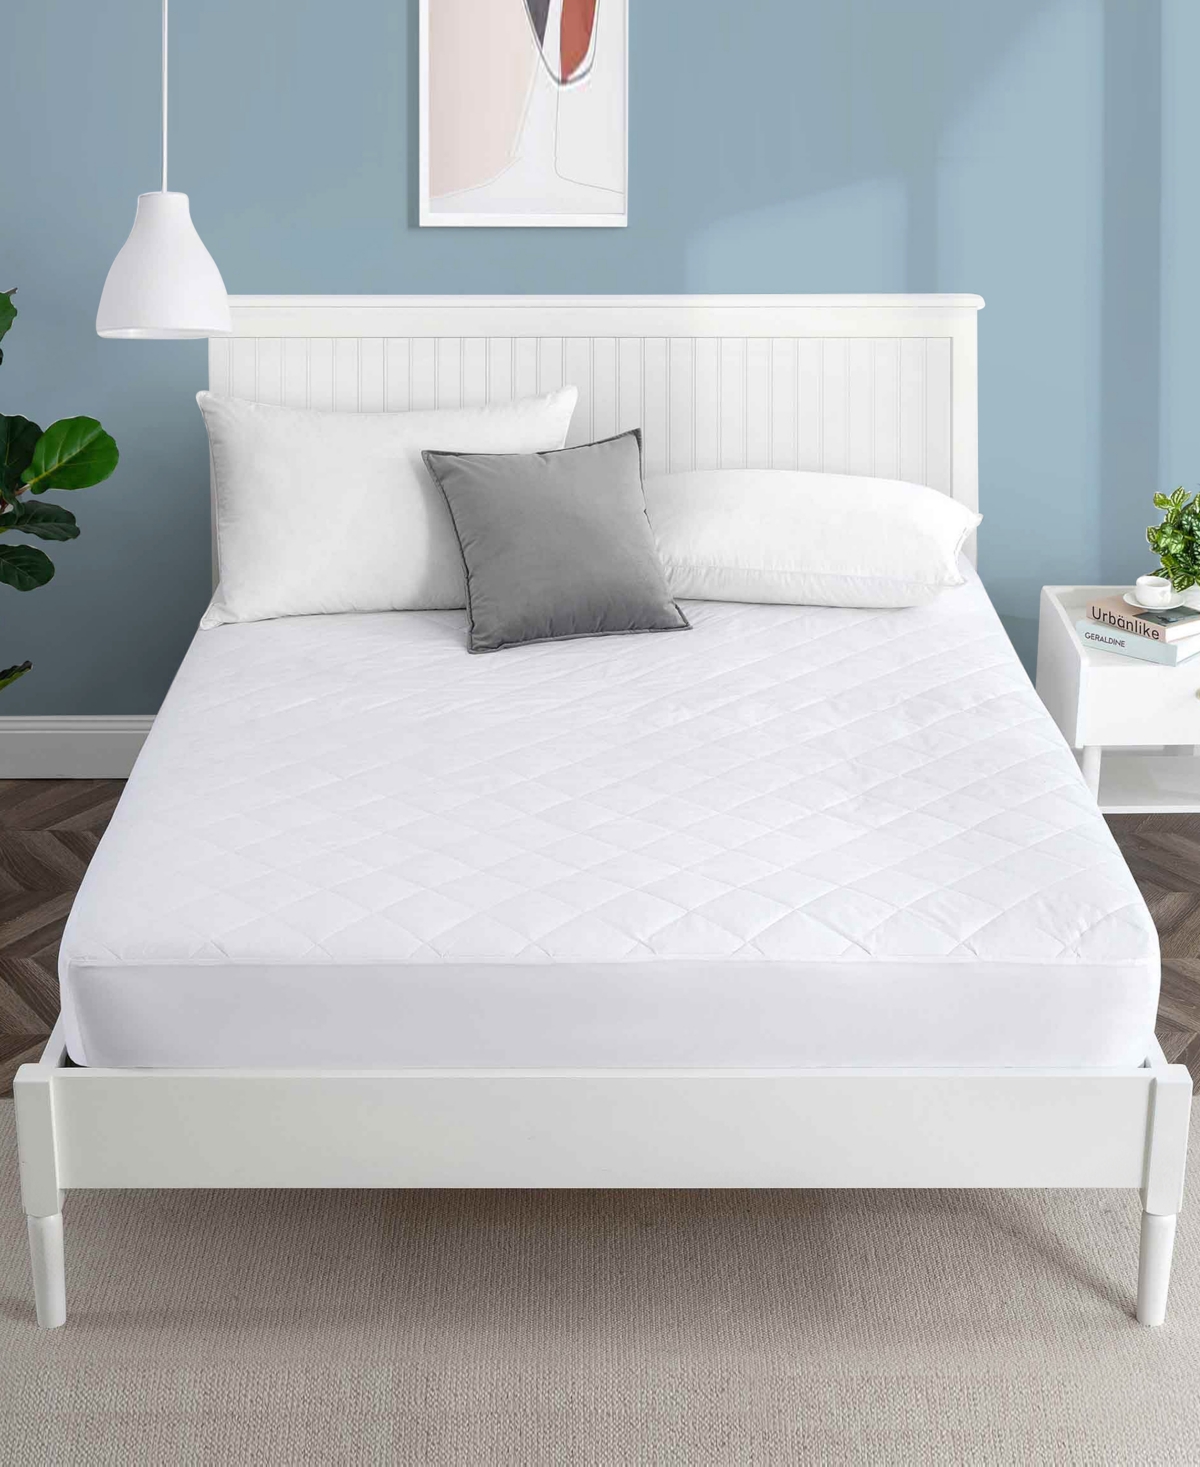 Unikome 100 Breathable Cotton Square Quilted Fitted Mattress Pad Collection In White